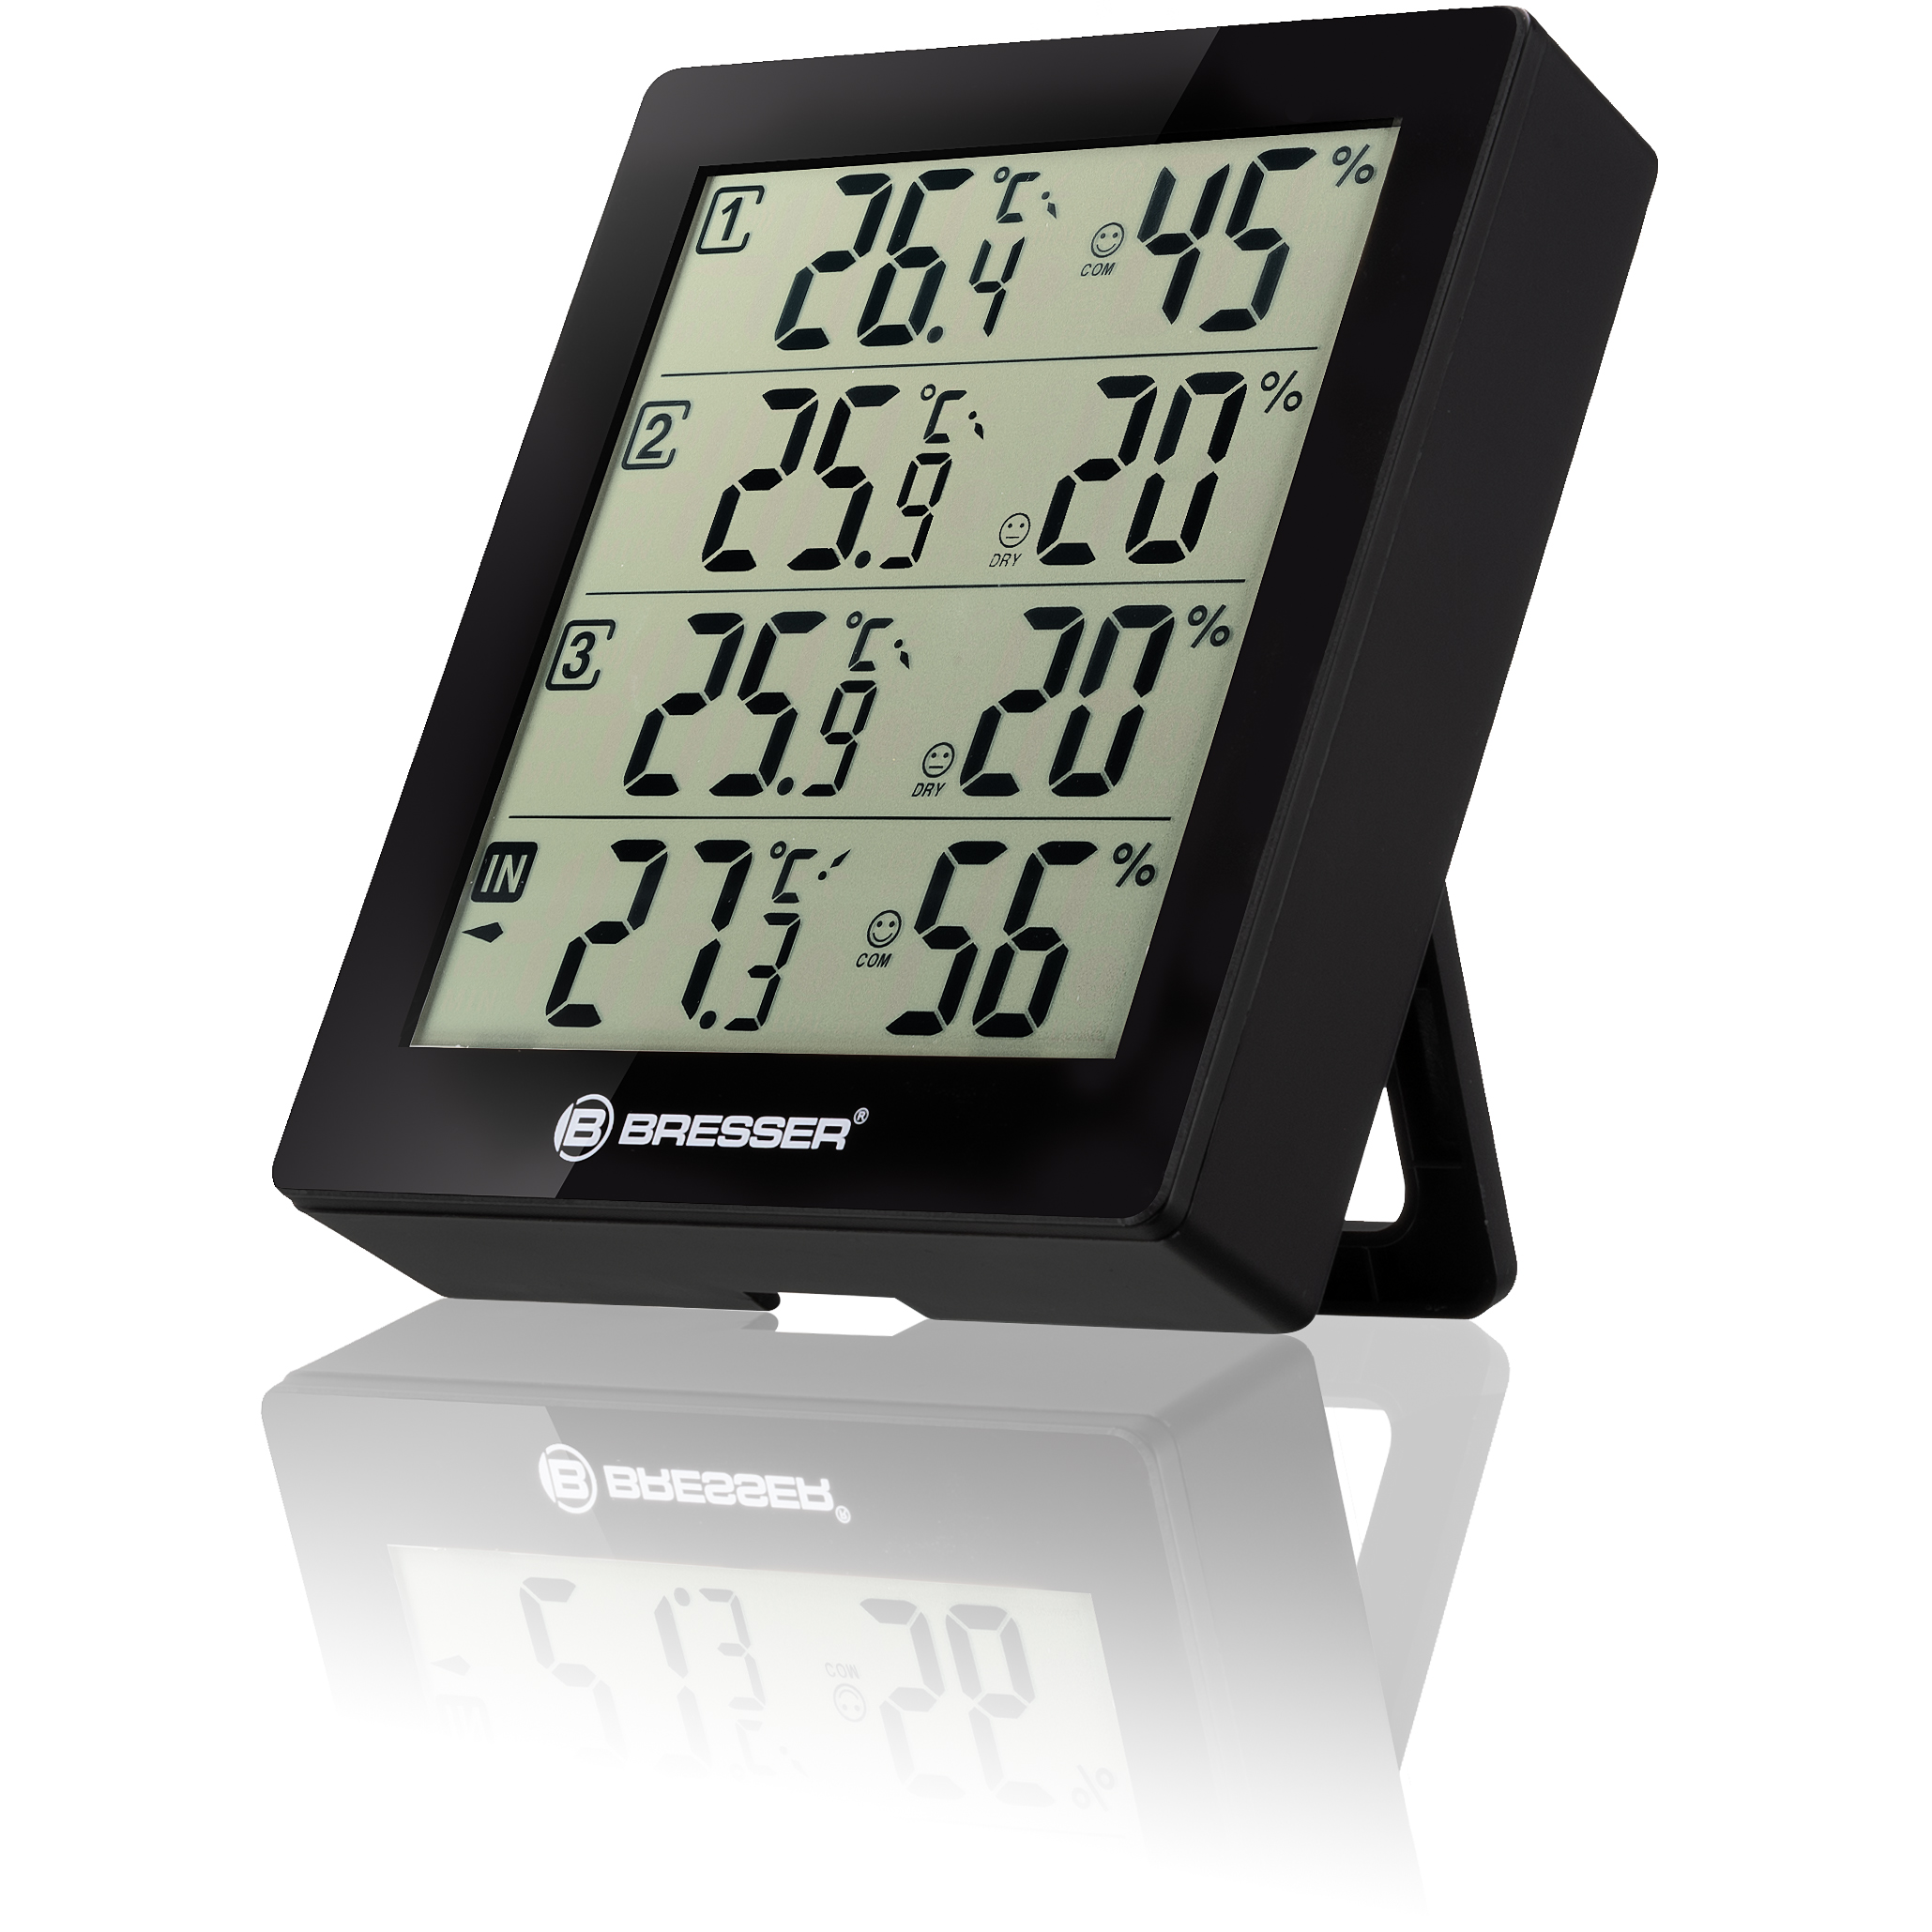 BRESSER Thermo-Hygrometer Quadro with 4 Independent Measuring Details